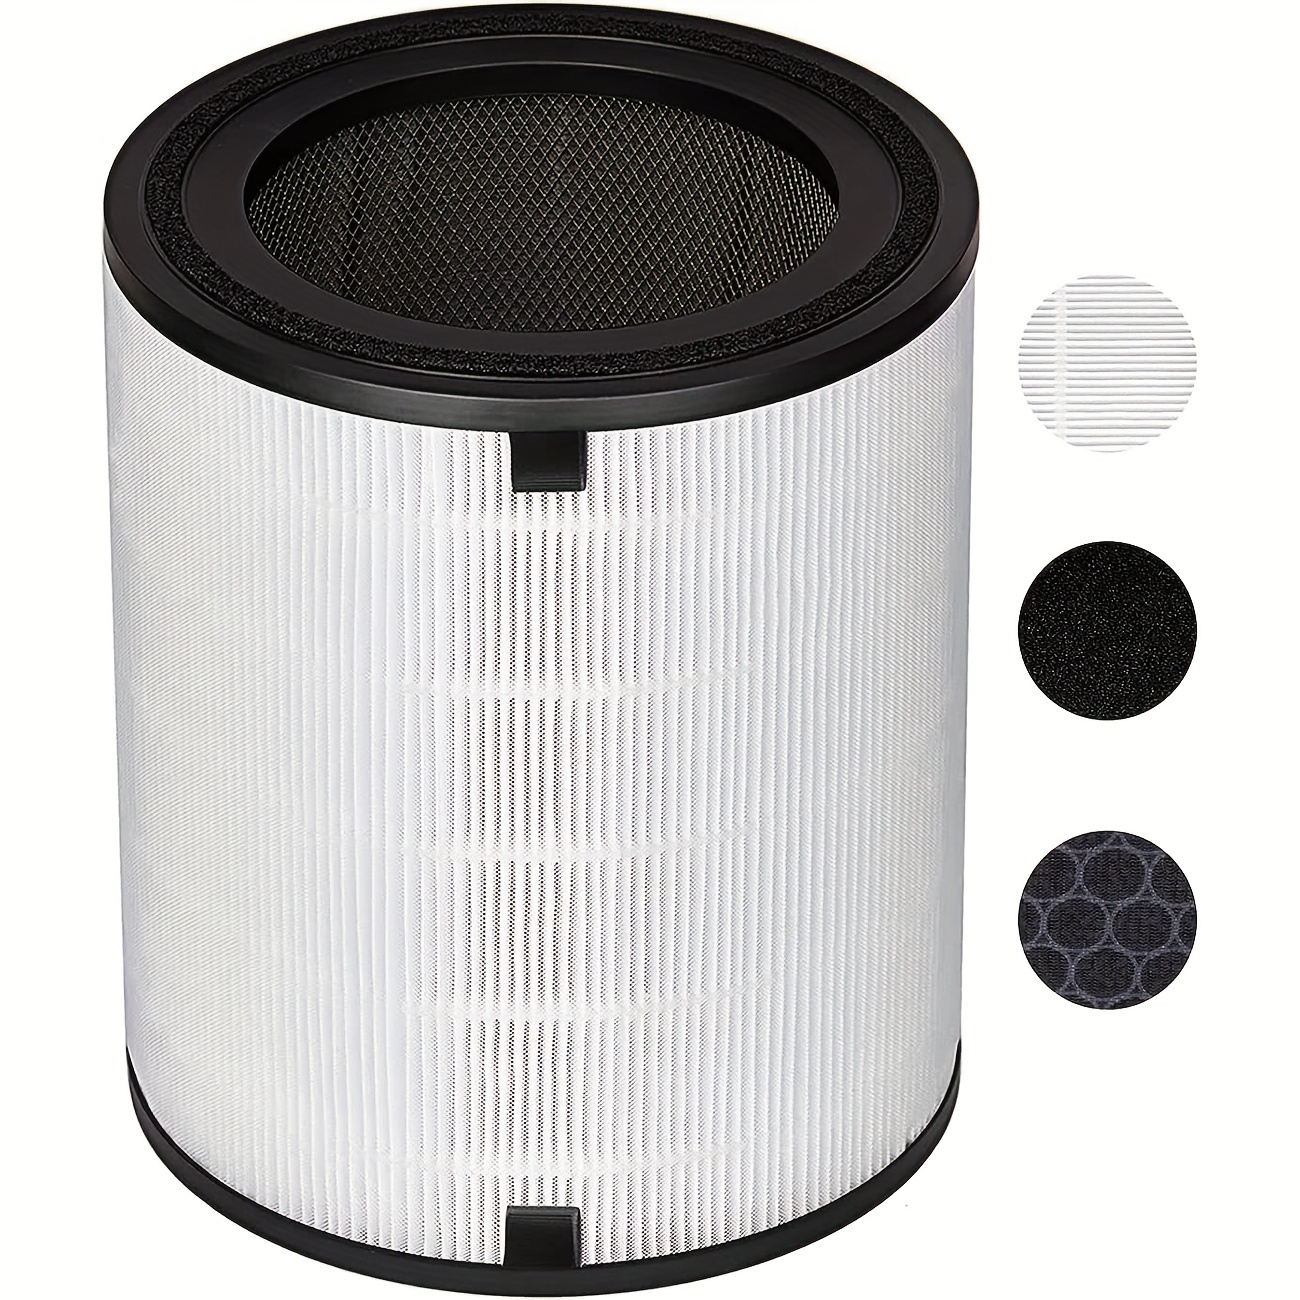 Levoit True HEPA Air Purifier LV-PUR131, Compact Air Cleaner for